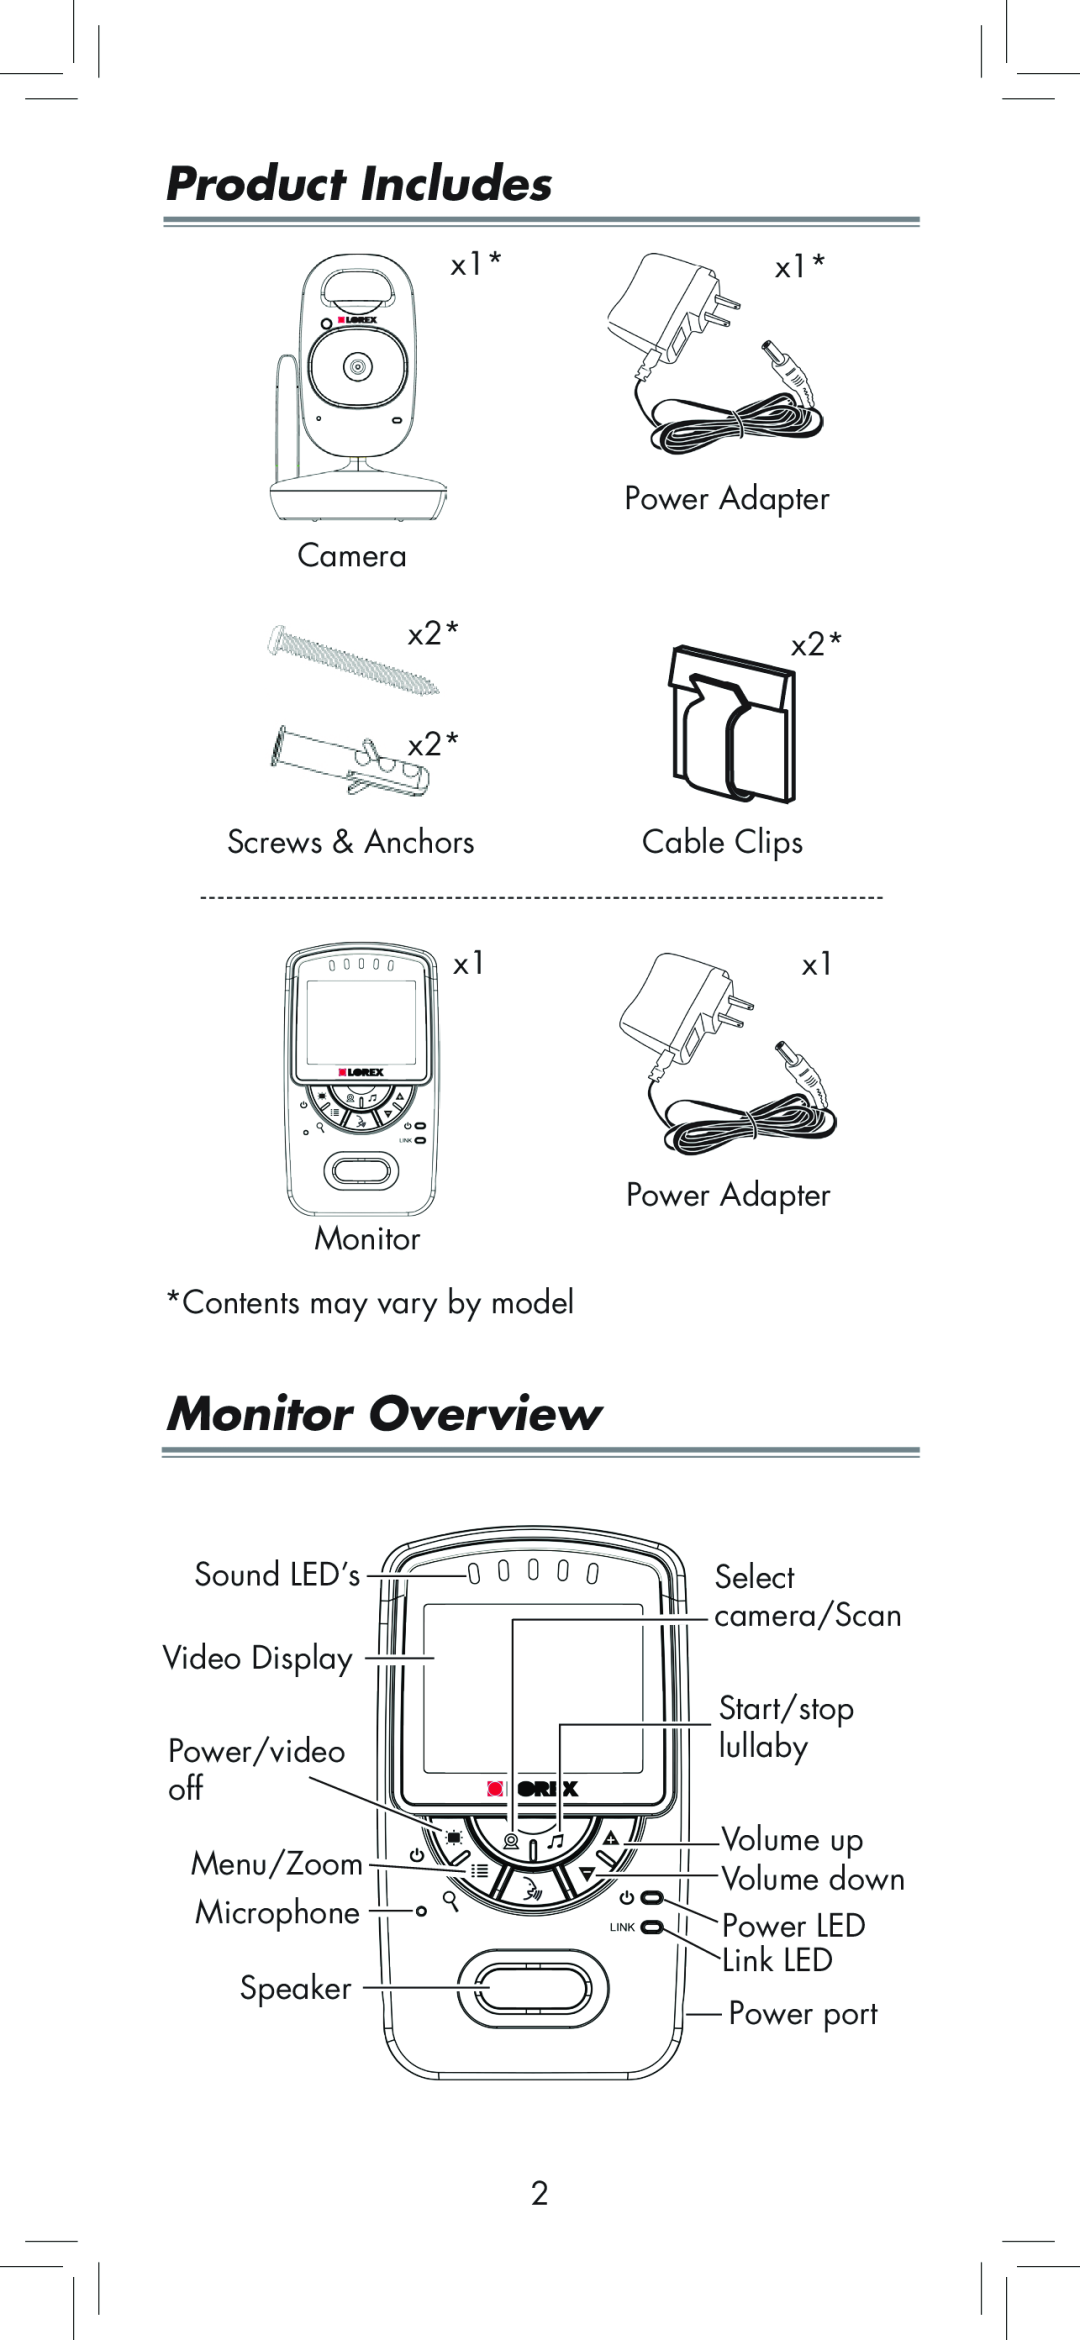 LOREX Technology BB2411 manual Product Includes, Monitor Overview, x1 Camera x2 x2 Screws & Anchors x1 Monitor 